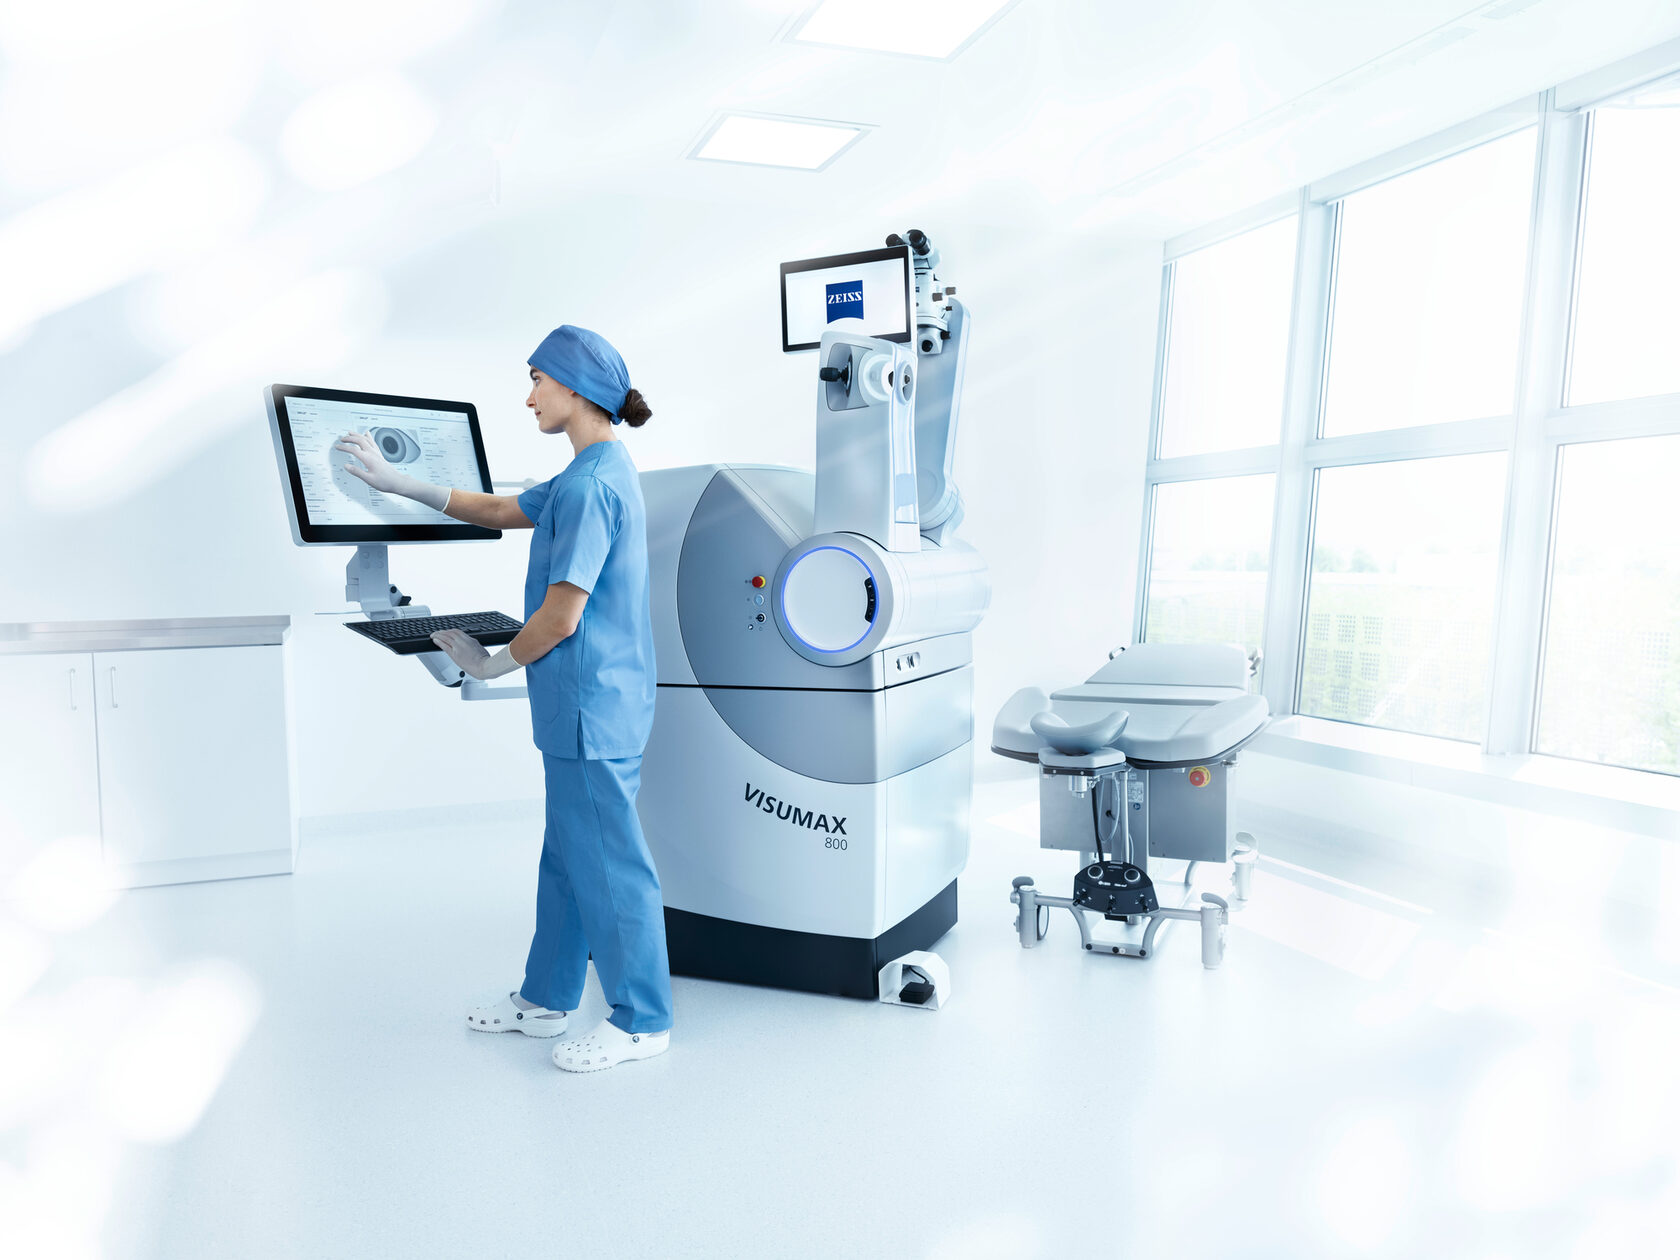 The Zeiss Visumax® 800 in use at LEC - London